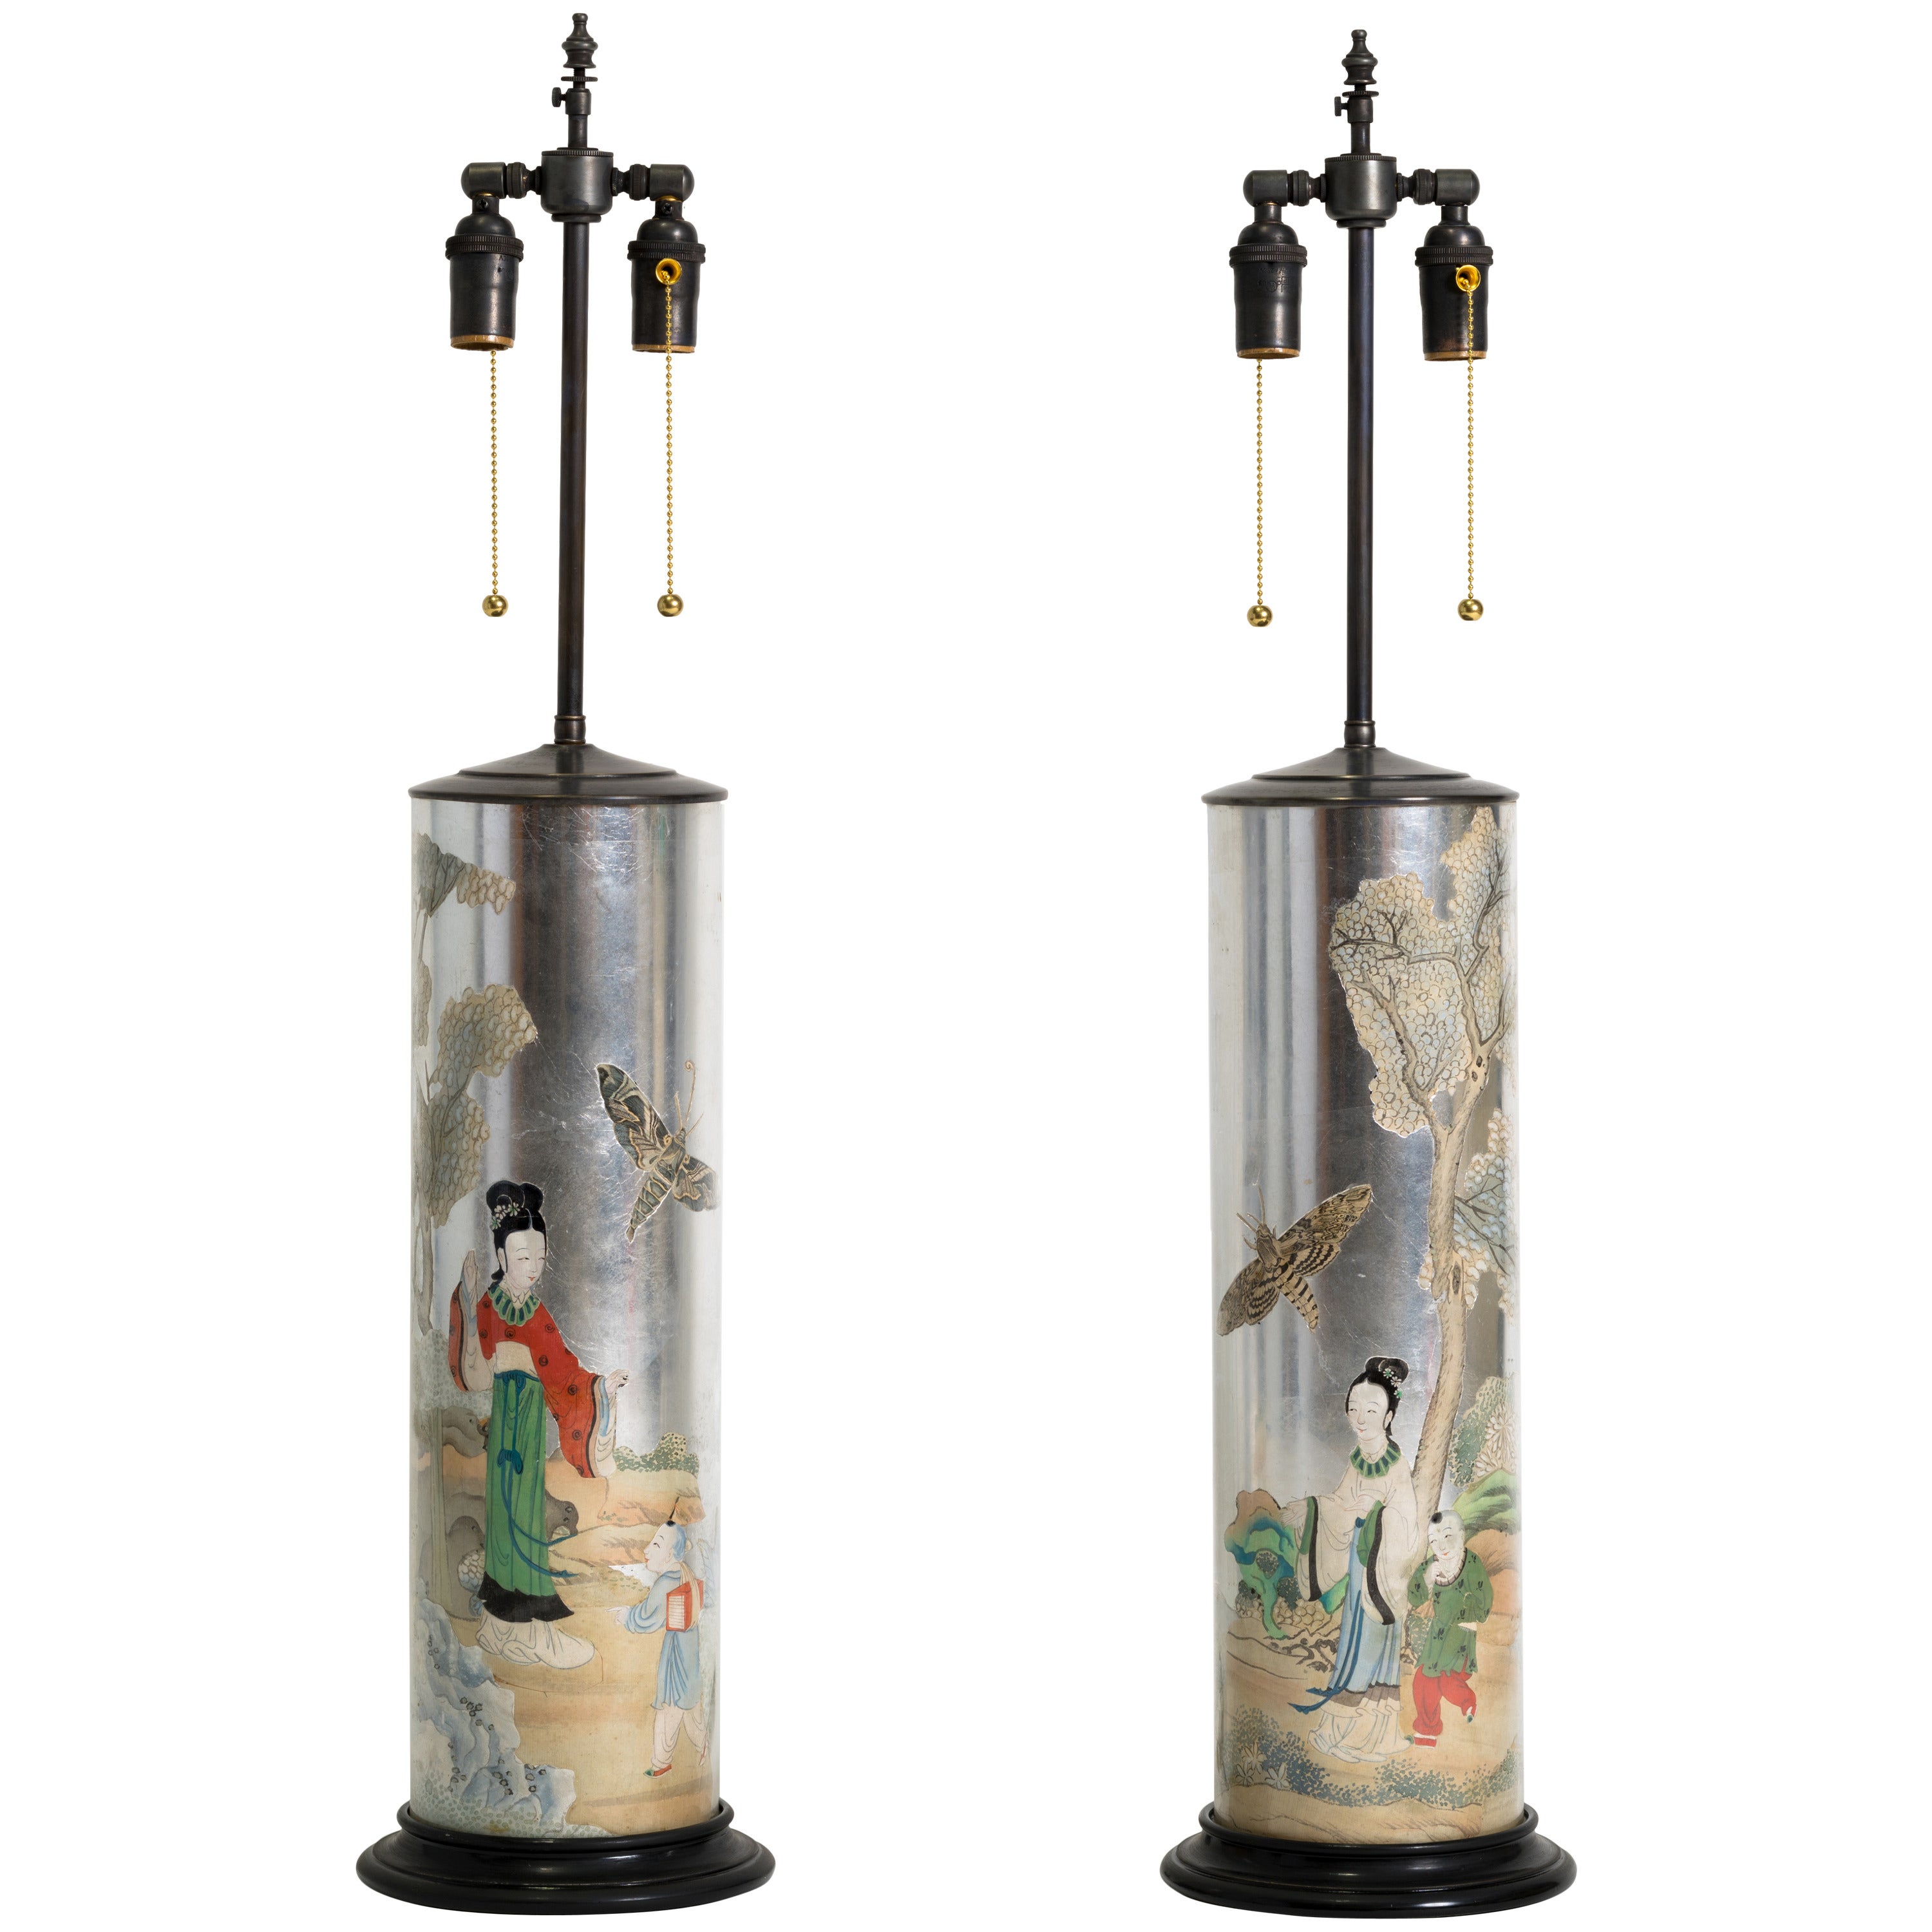 Églomisé and Decoupage Chinoiserie Glass Table Lamps